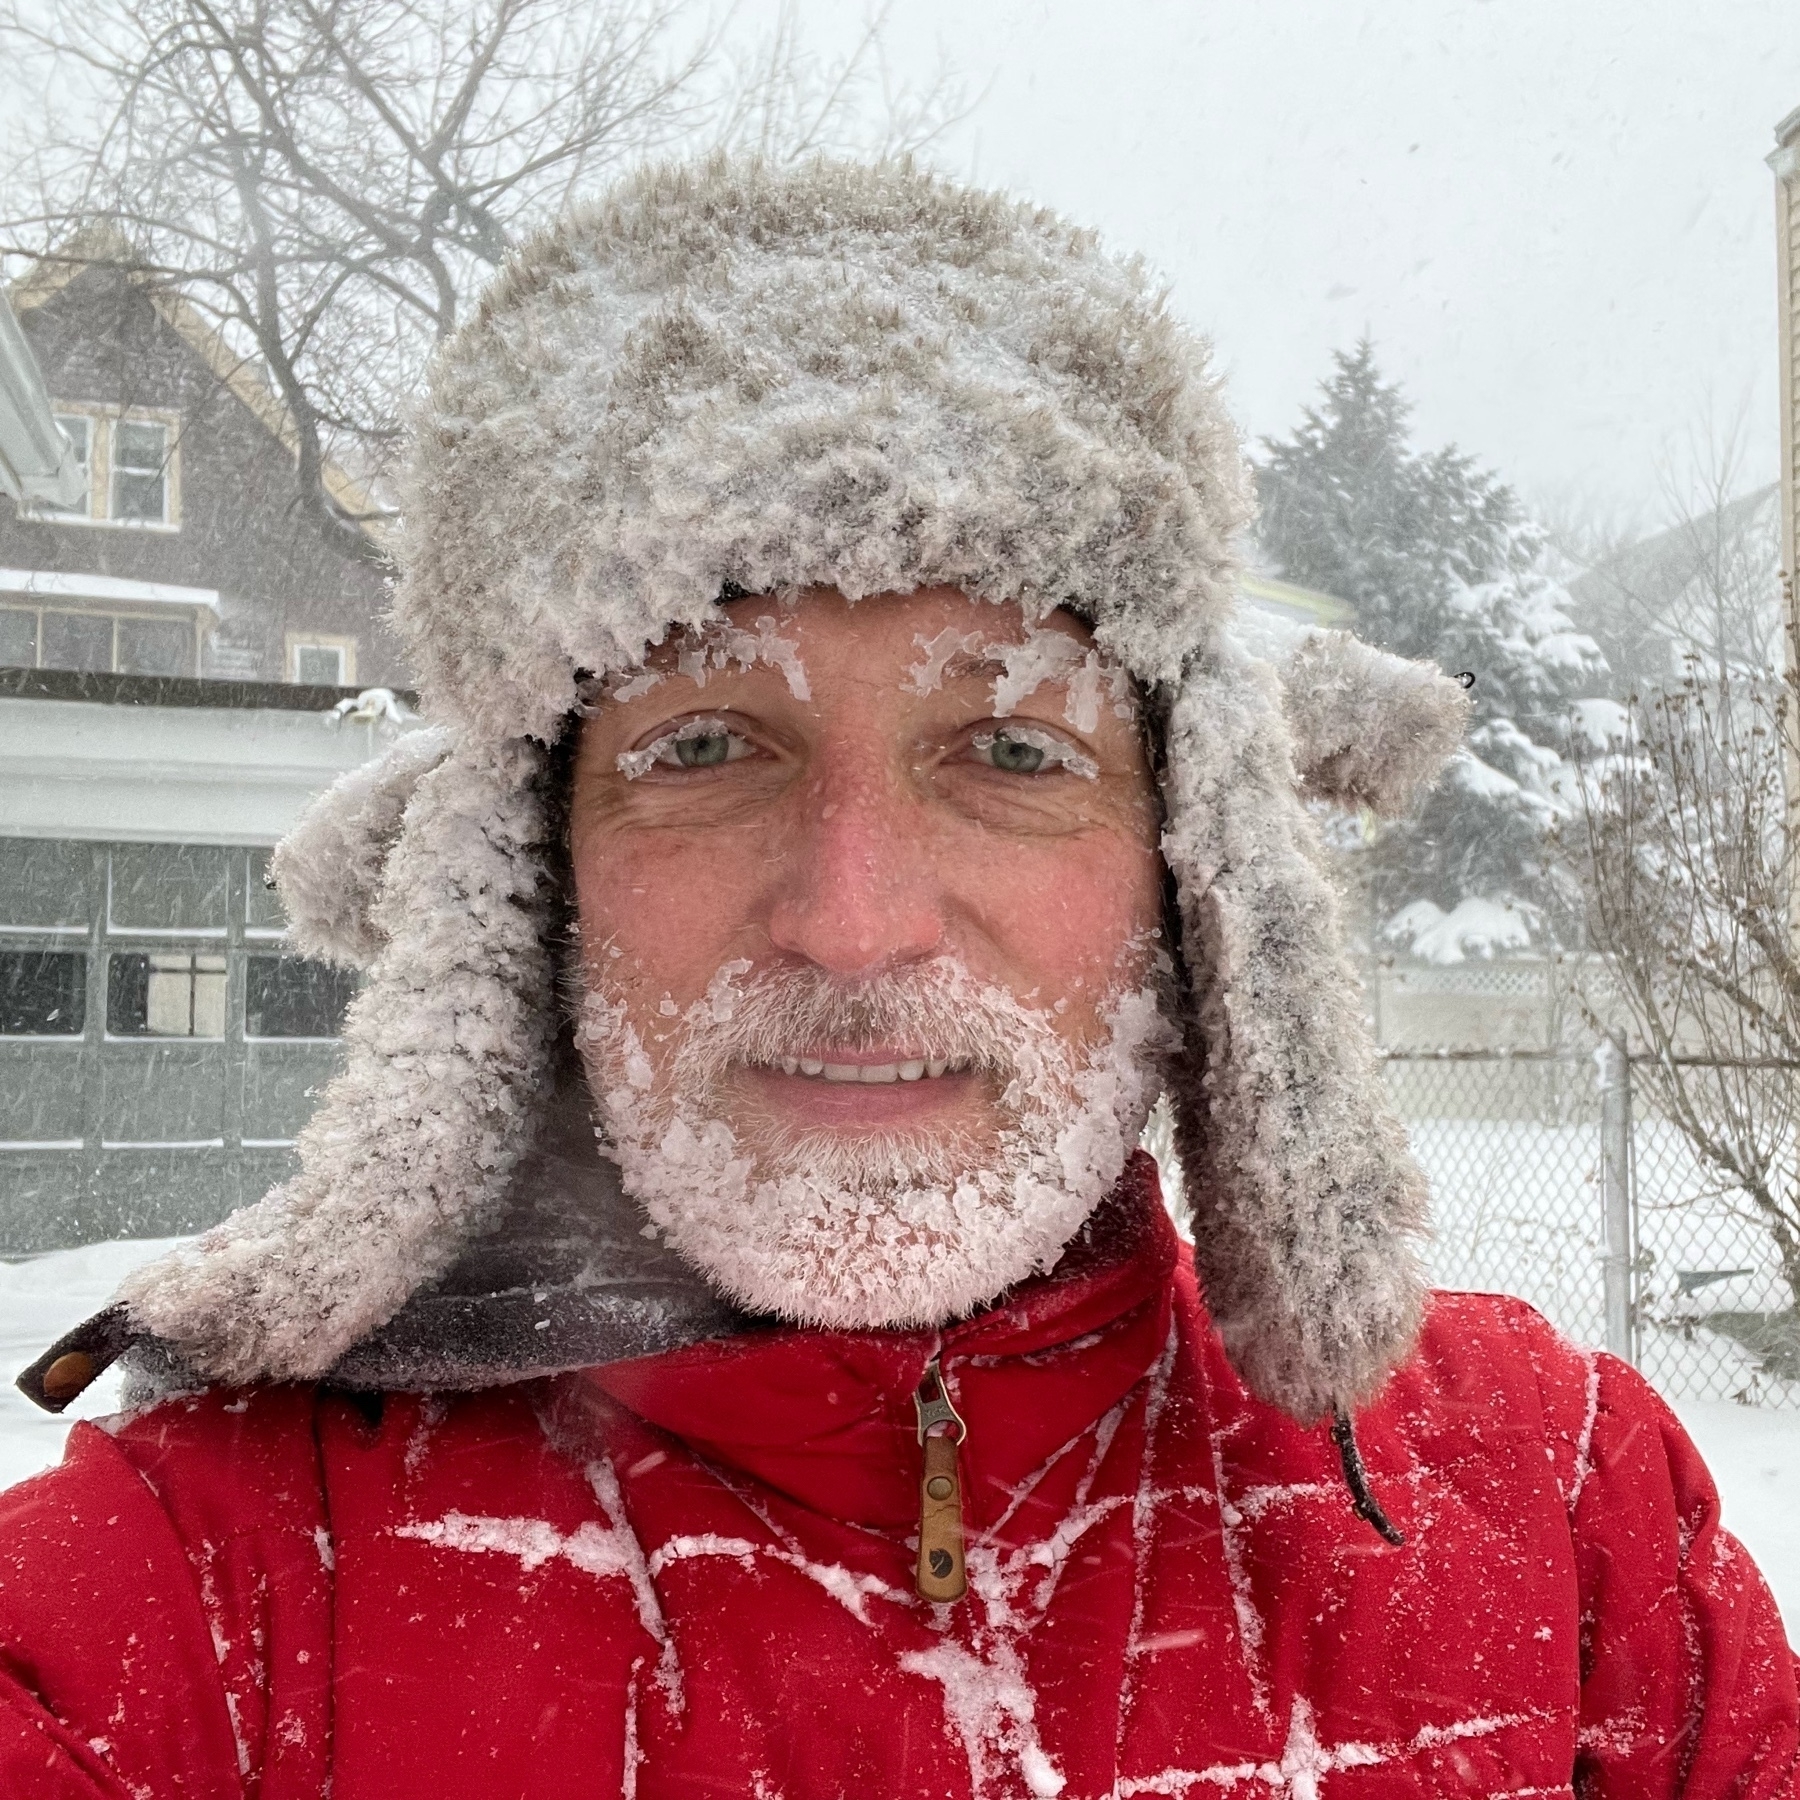 selfie in snowy outdoors with snow covered cap and snow and ice stuck to beard and eyelashes